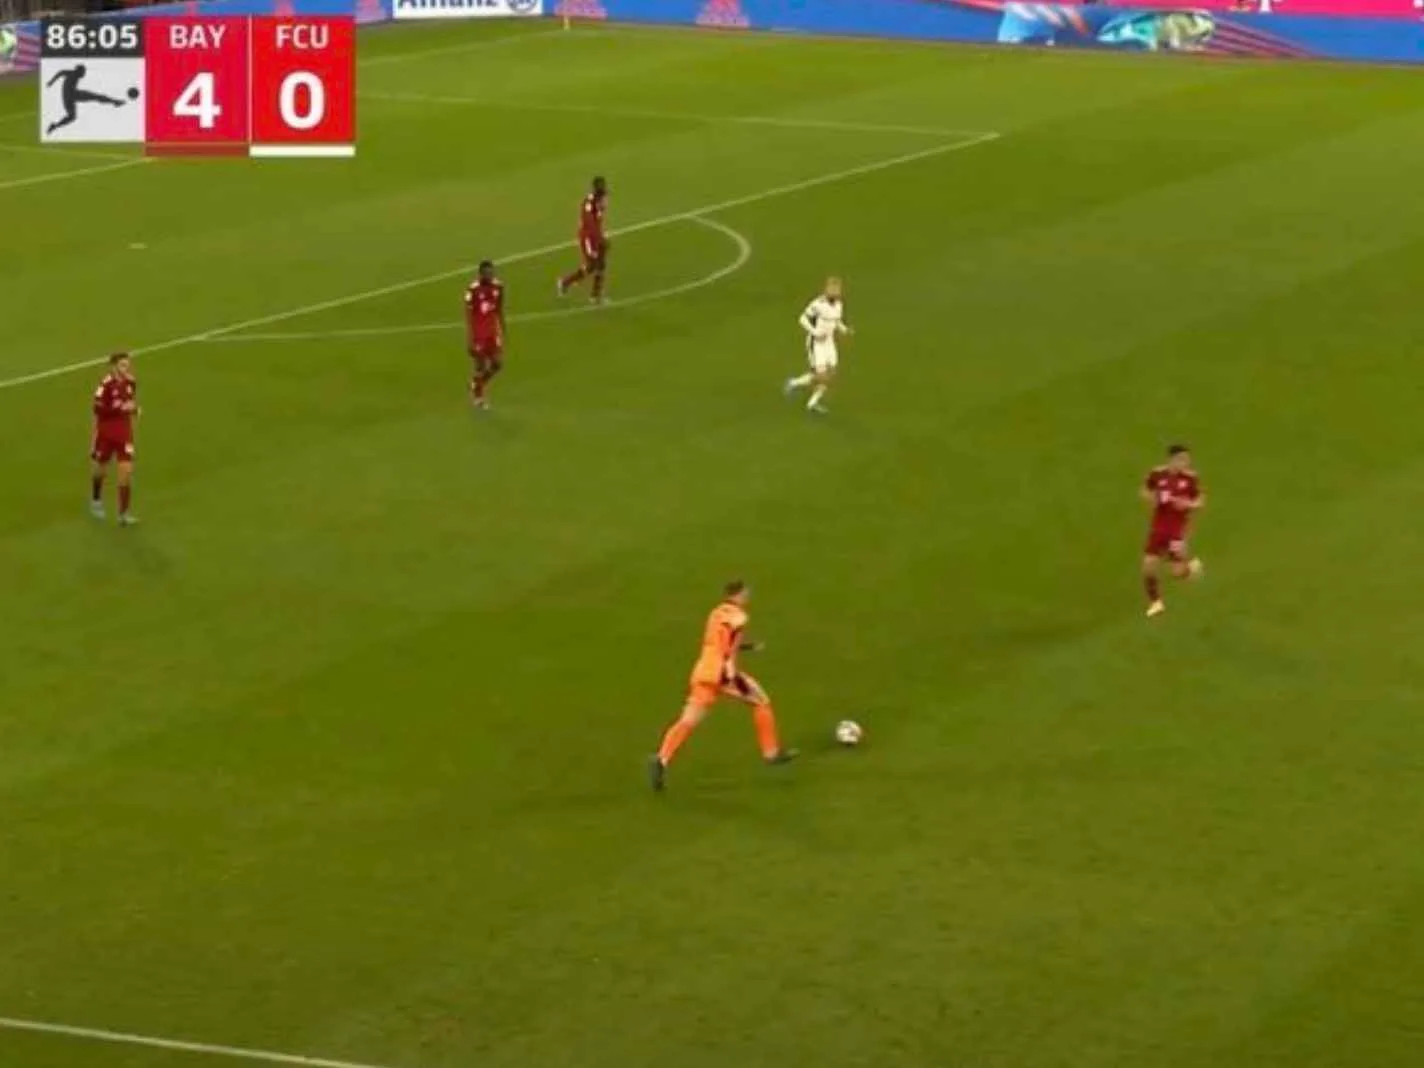 Manuel Neuer caught playing in midfield against Union Berlin